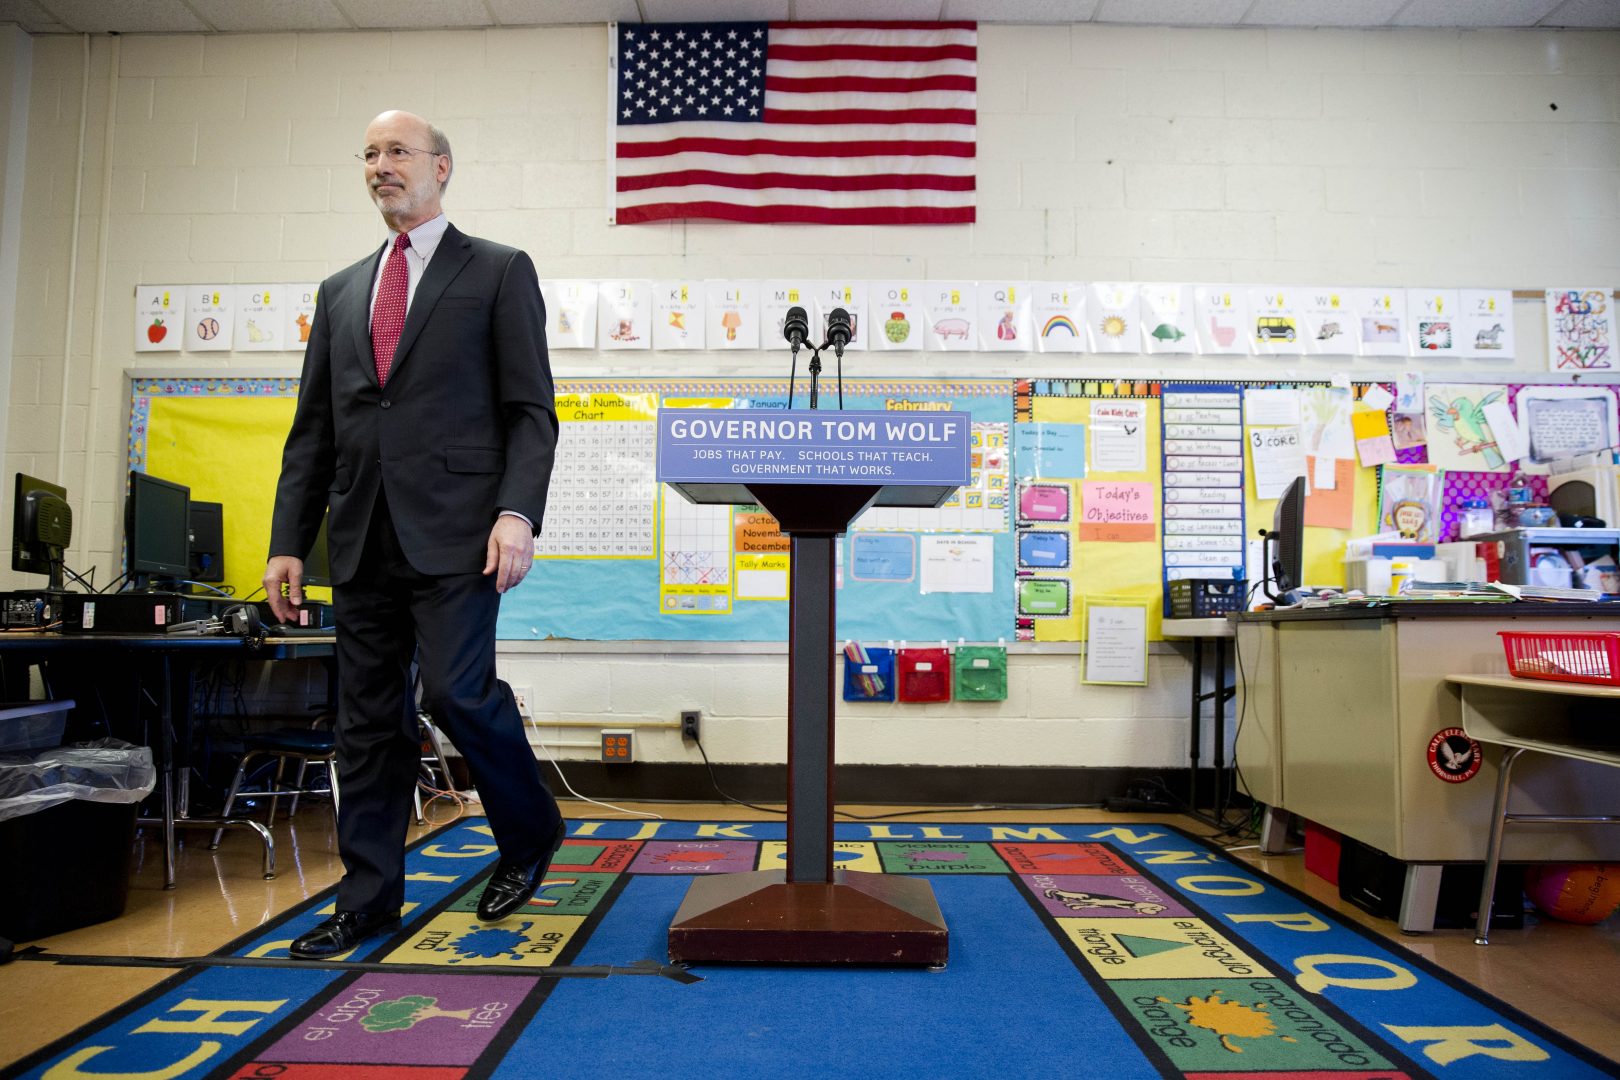 FILE PHOTO: Gov. Wolf steps away from the podium at the end of a news conference at Caln Elementary School Wednesday, Feb. 11, 2015, in Thorndale, Pa. 